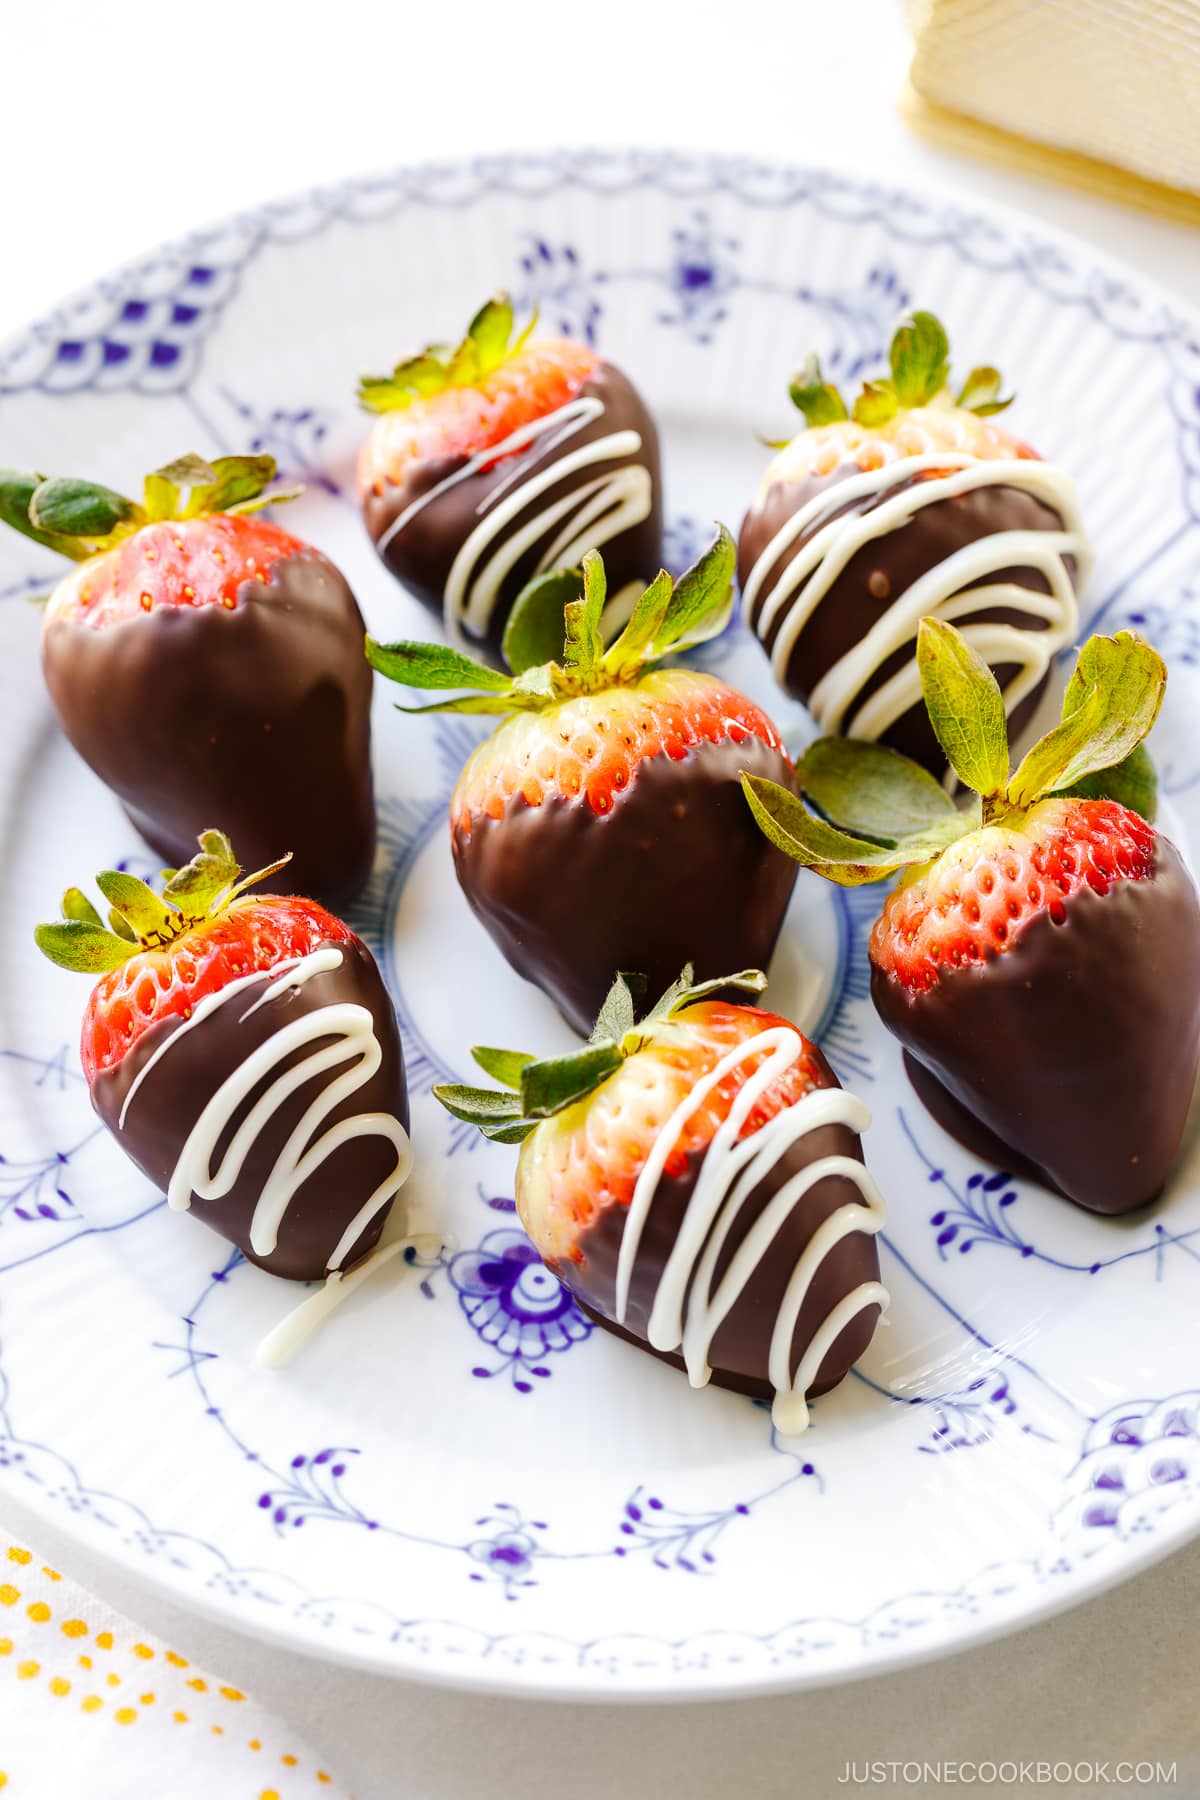 Seven homemade chocolate covered strawberries on a Royal Copenhagen plate.